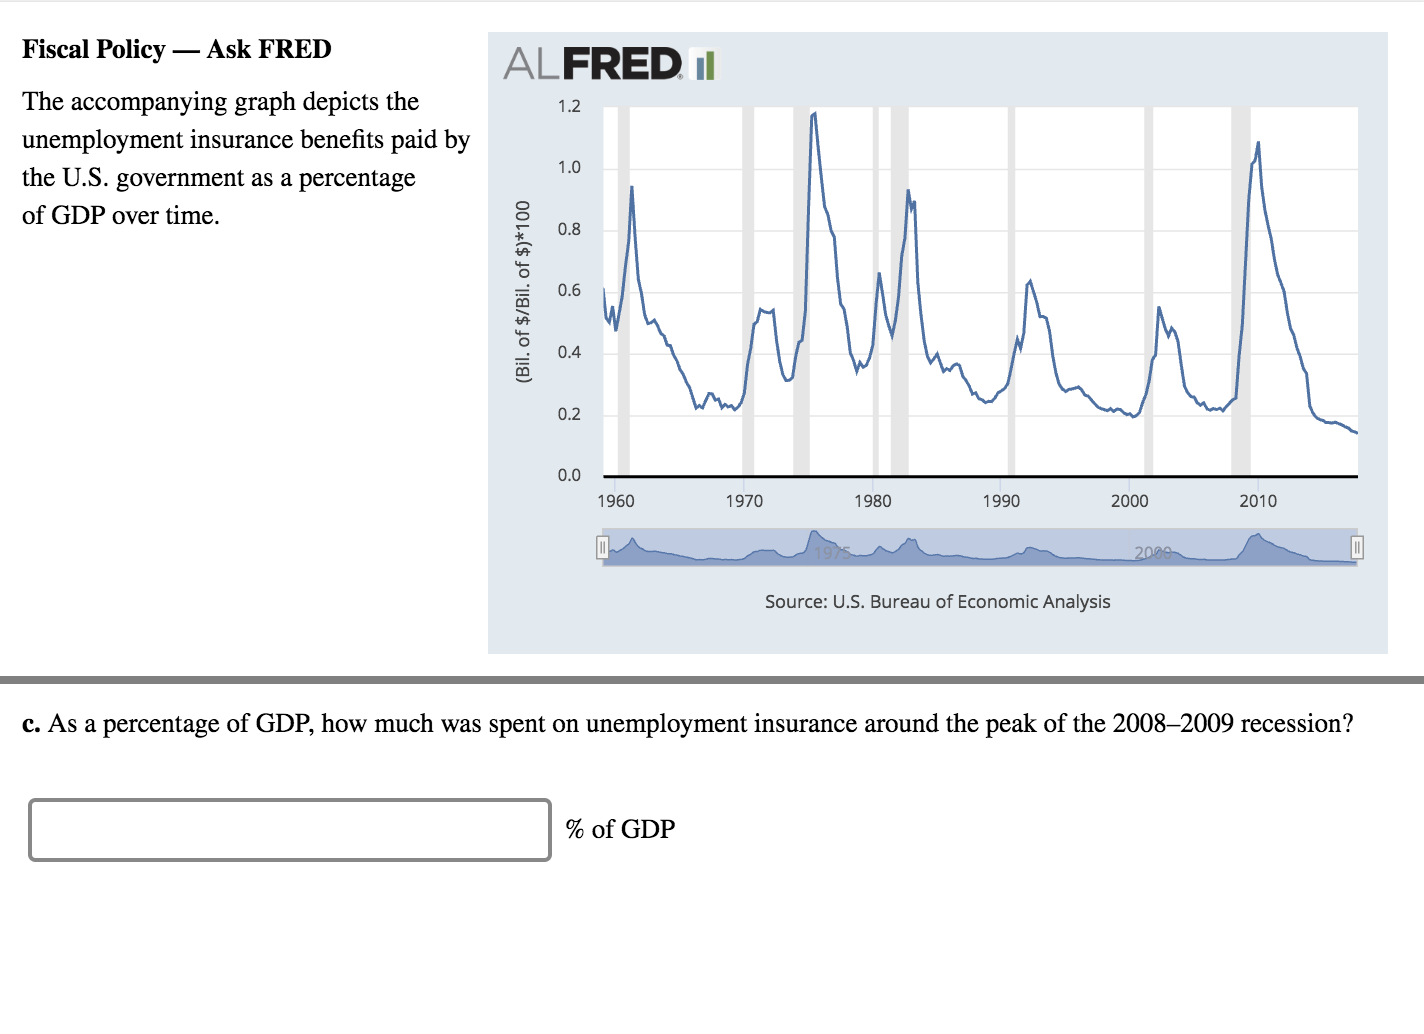 Fiscal Policy- Ask FRED
The accompanying graph depicts the
unemployment insurance benefits paid by
the U.S. government as a percentage
ALFRED
1.2
1.0
of GDP over time.
0.8
0.6
0. 0.4
0.2
0.0
1960
1970
1980
1990
2000
2010
Source: U.S. Bureau of Economic Analysis
c. As a percentage of GDP, how much was spent on unemployment insurance around the peak of the 2008-2009 recession?
% of GDP
